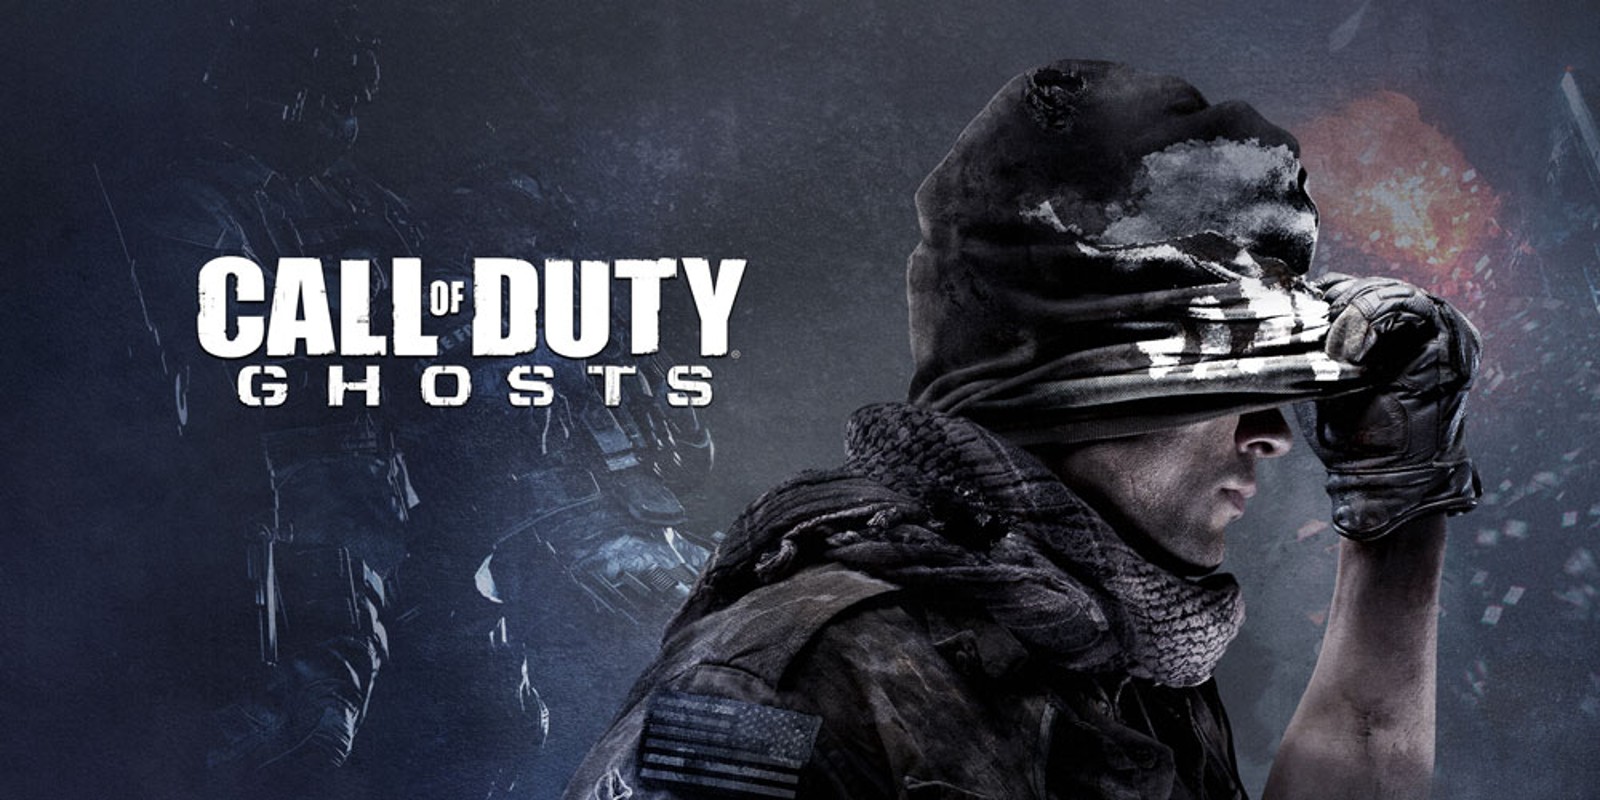 [⏪REWIND] Call of Duty : Ghosts sur PS4